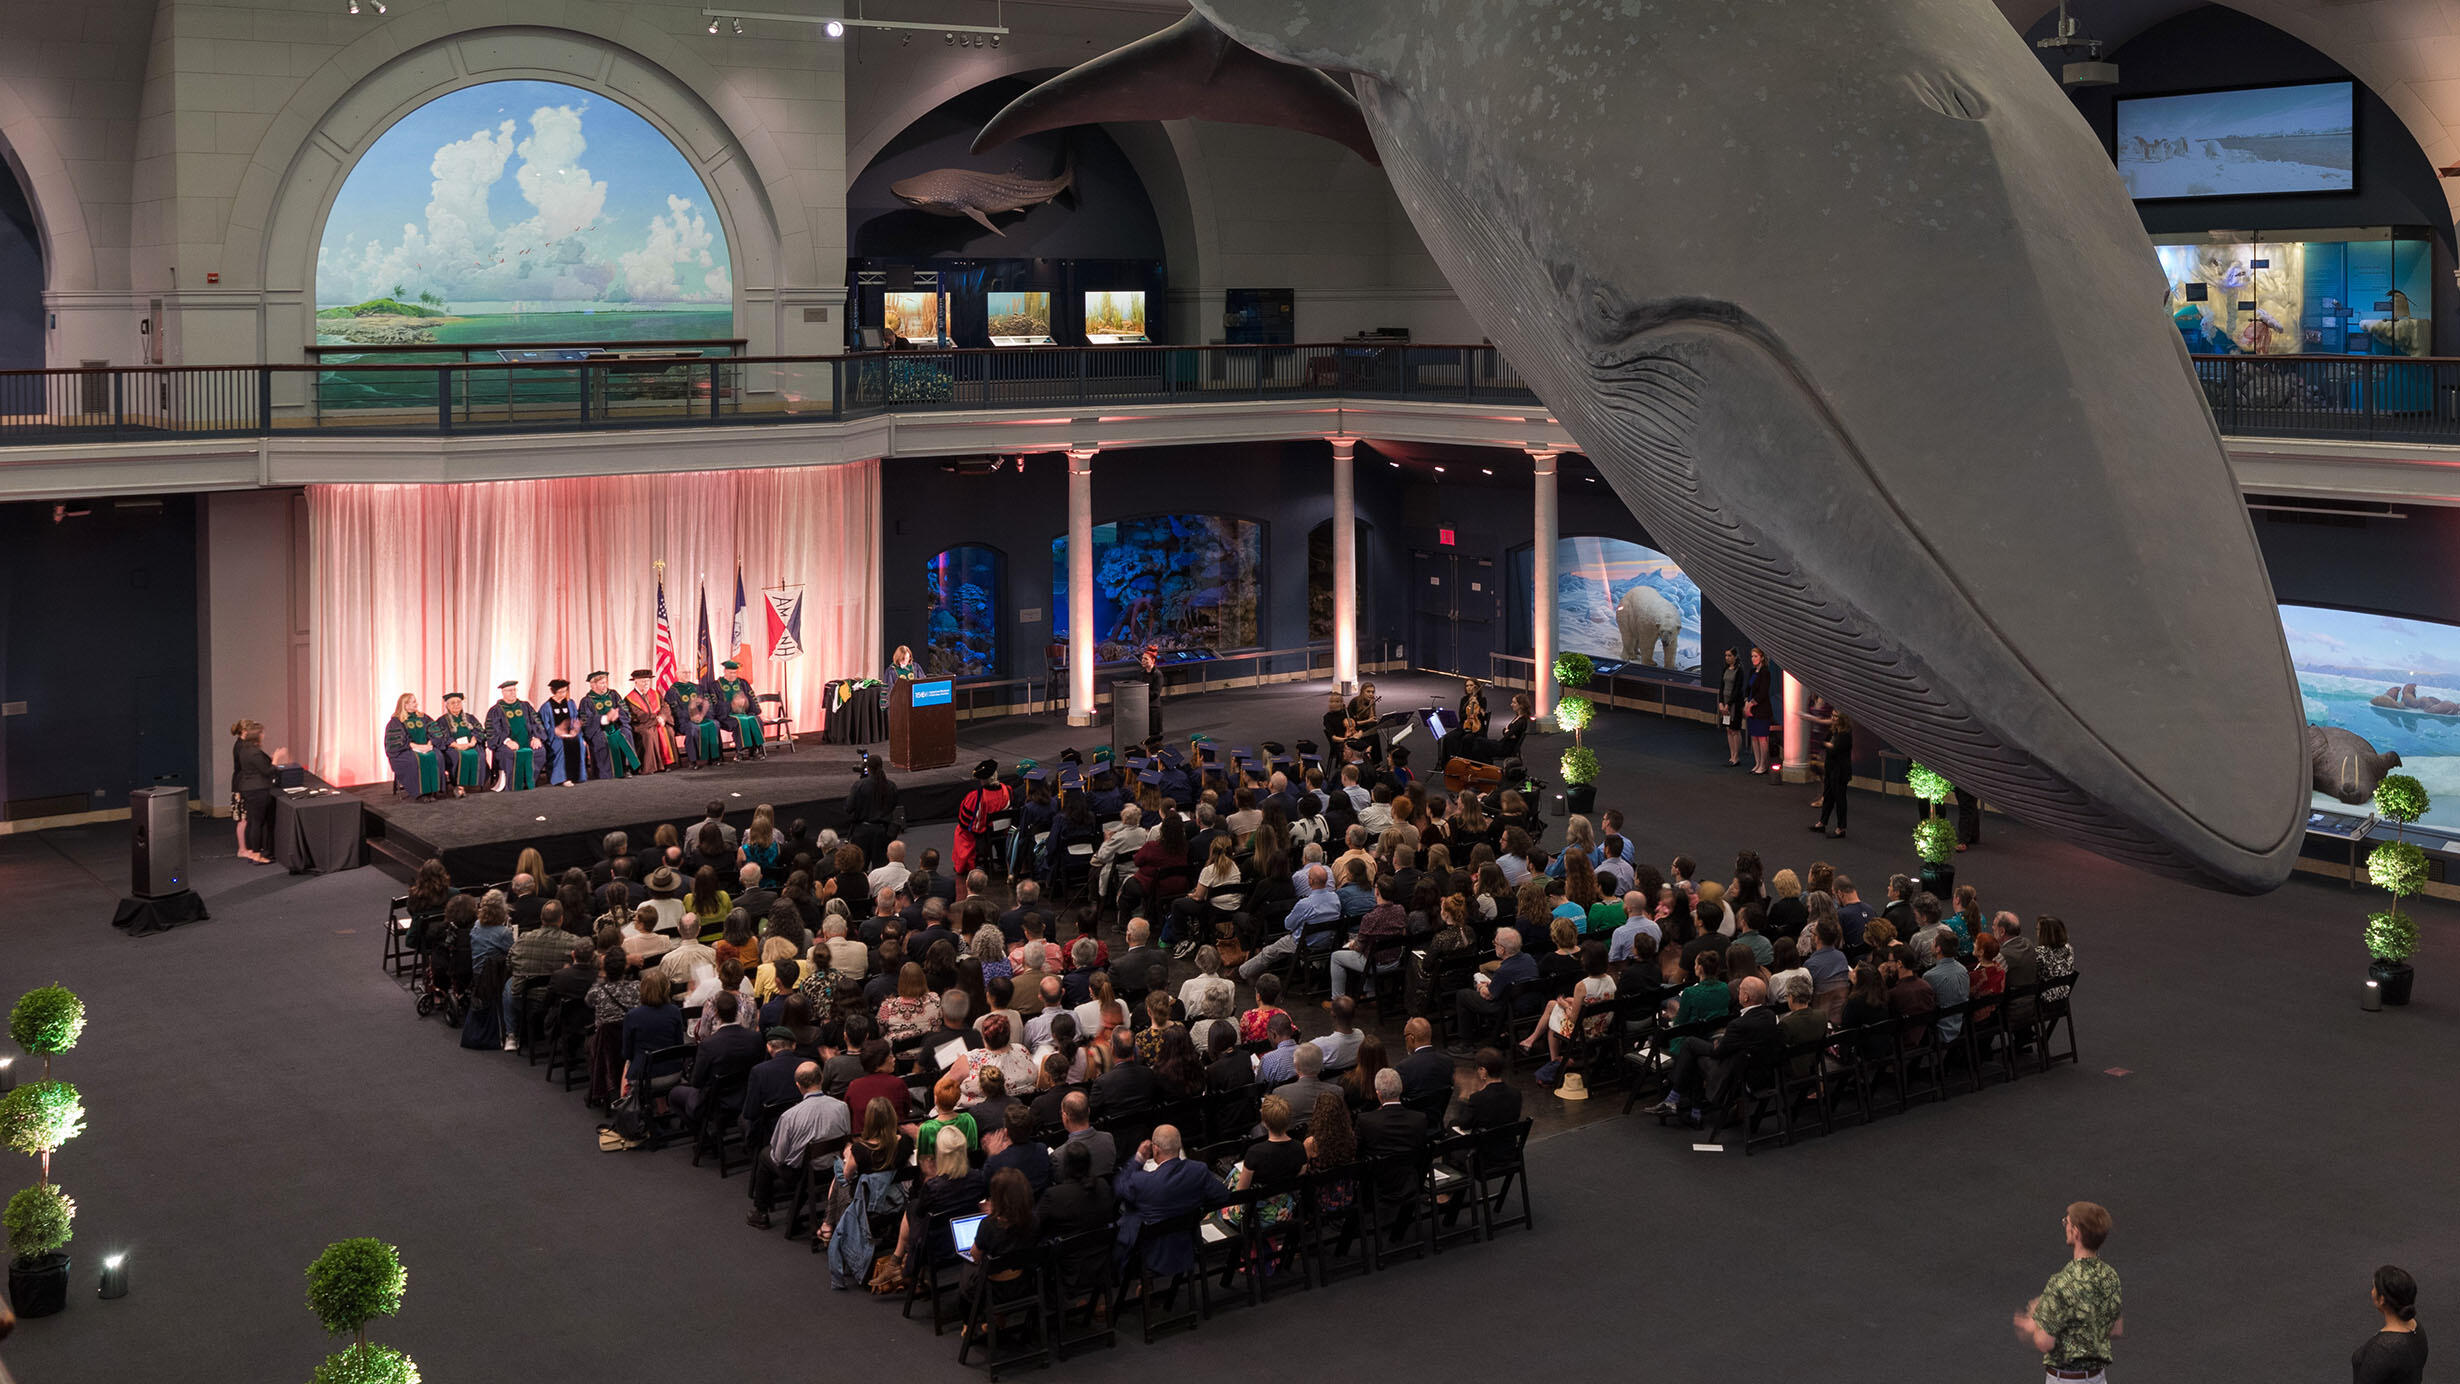 Participants and guests are seated under the blue whale for the 2019 graduation ceremony for the Richard Gilder Graduate School.